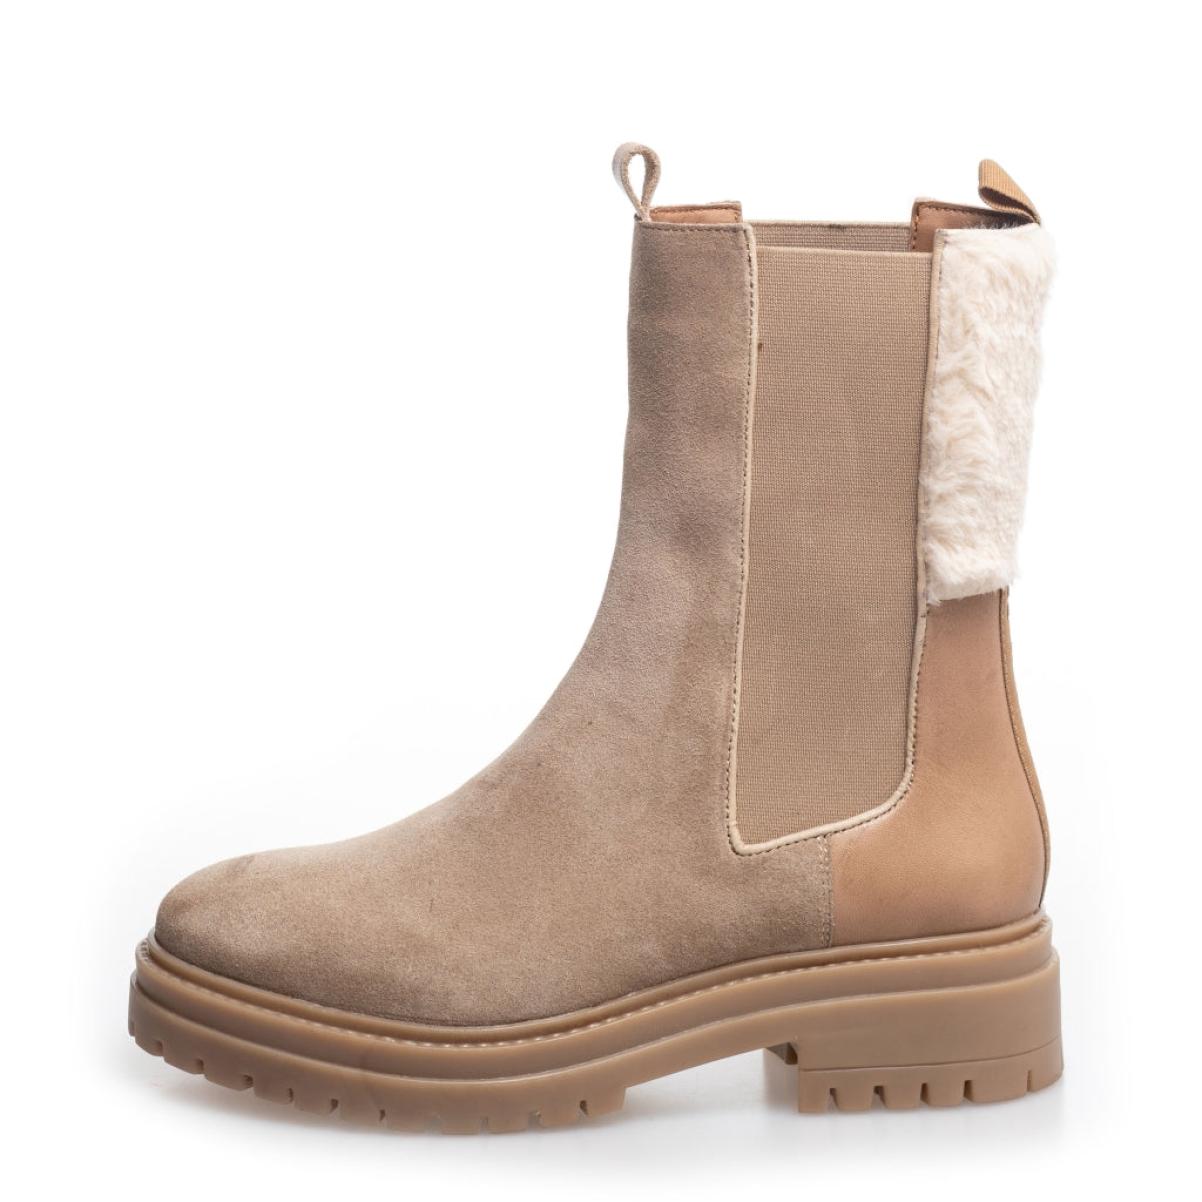 Guaranteed Copenhagen Shoes Beverly Boot Suede - Sand Women Ankle Boots